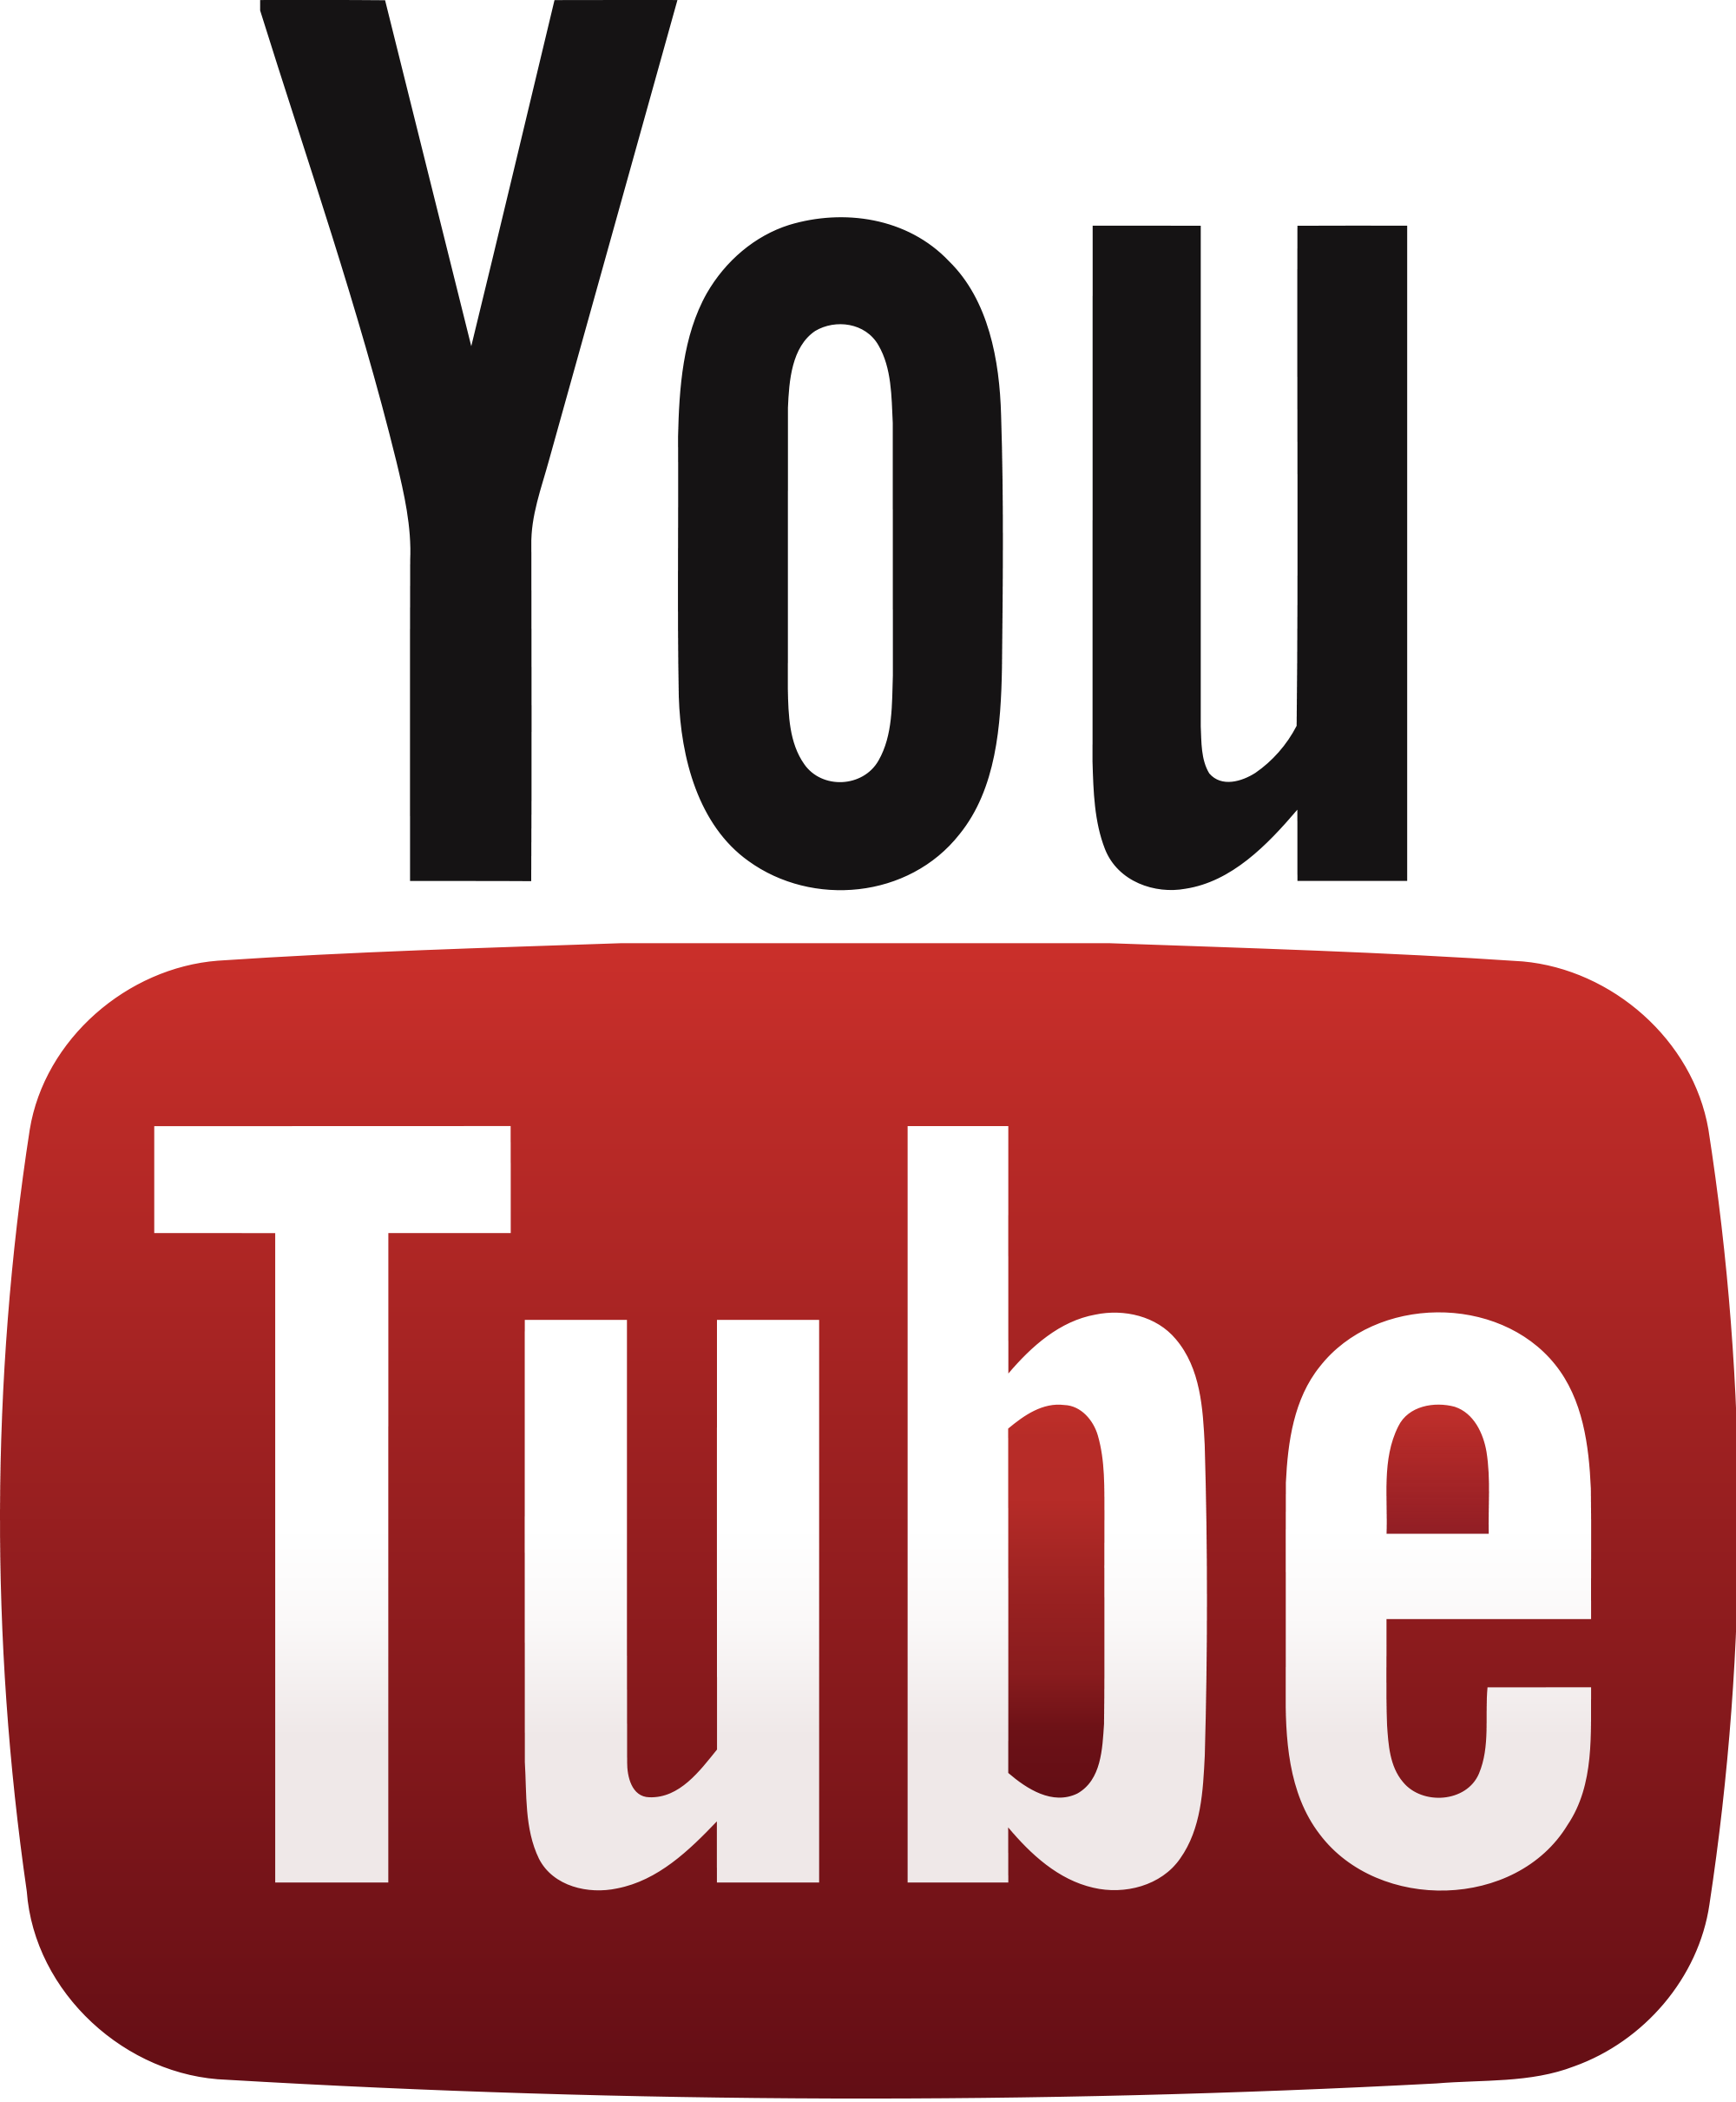 YouTube Logo - YouTube Transparent Background png download - 2000*2421